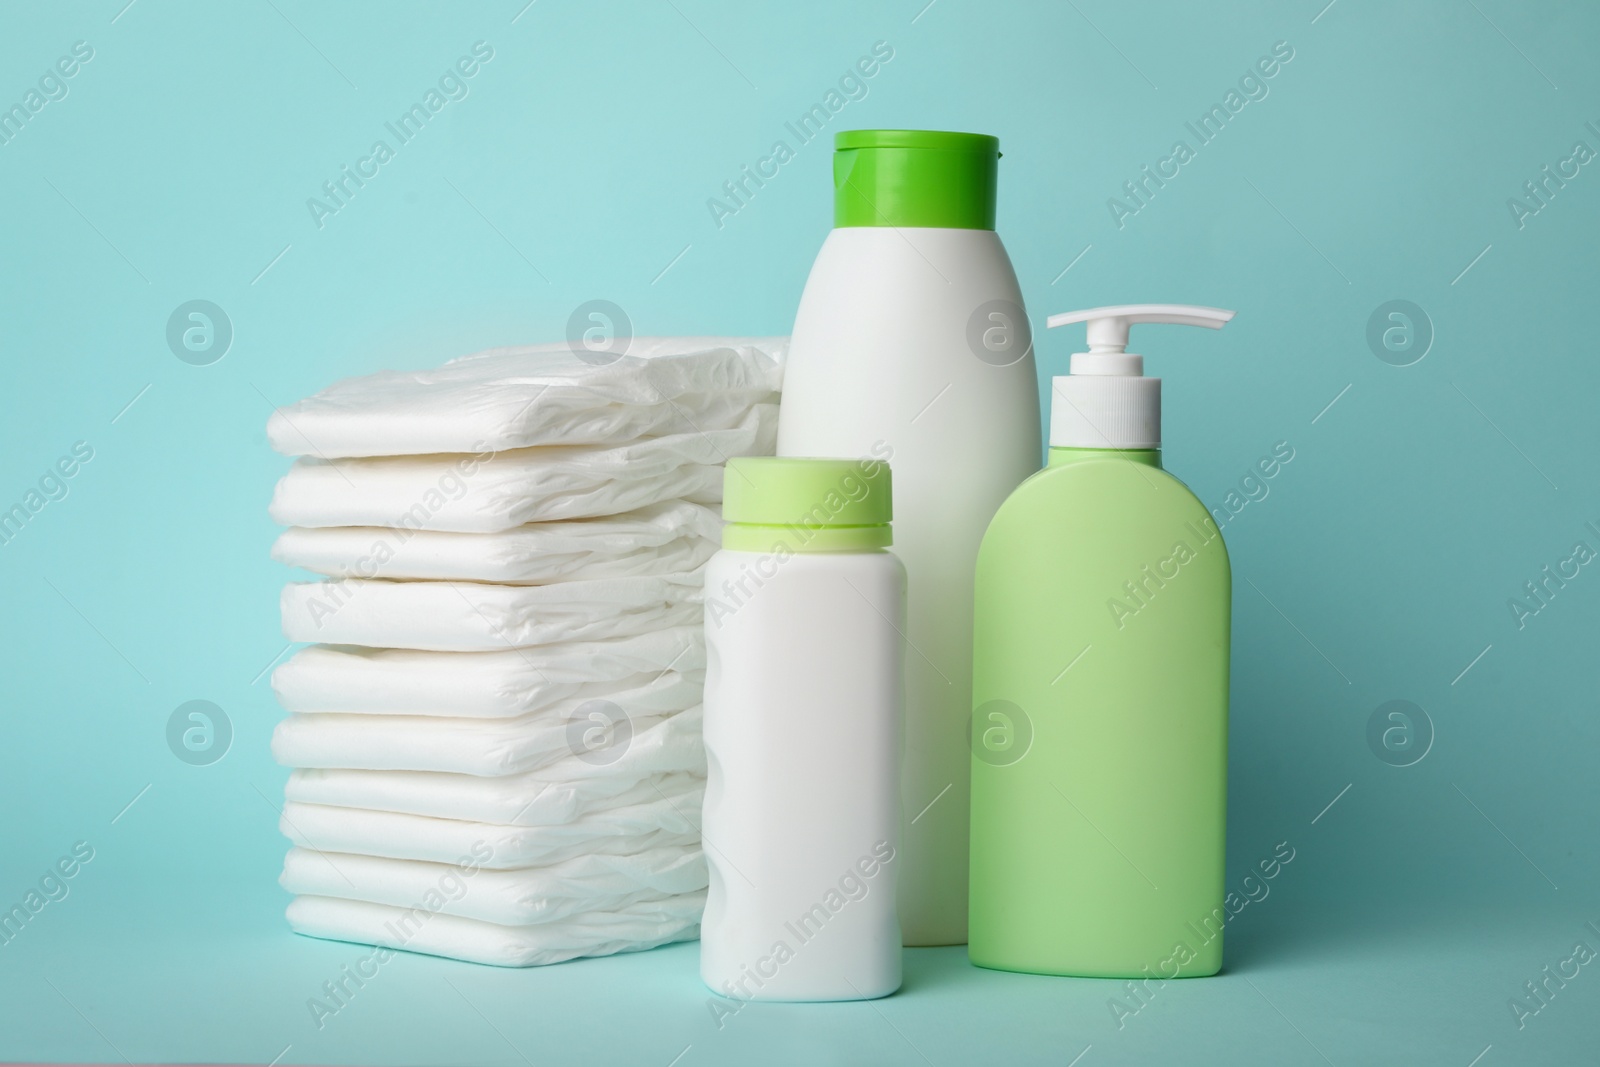 Photo of Diapers and baby accessories on light blue background